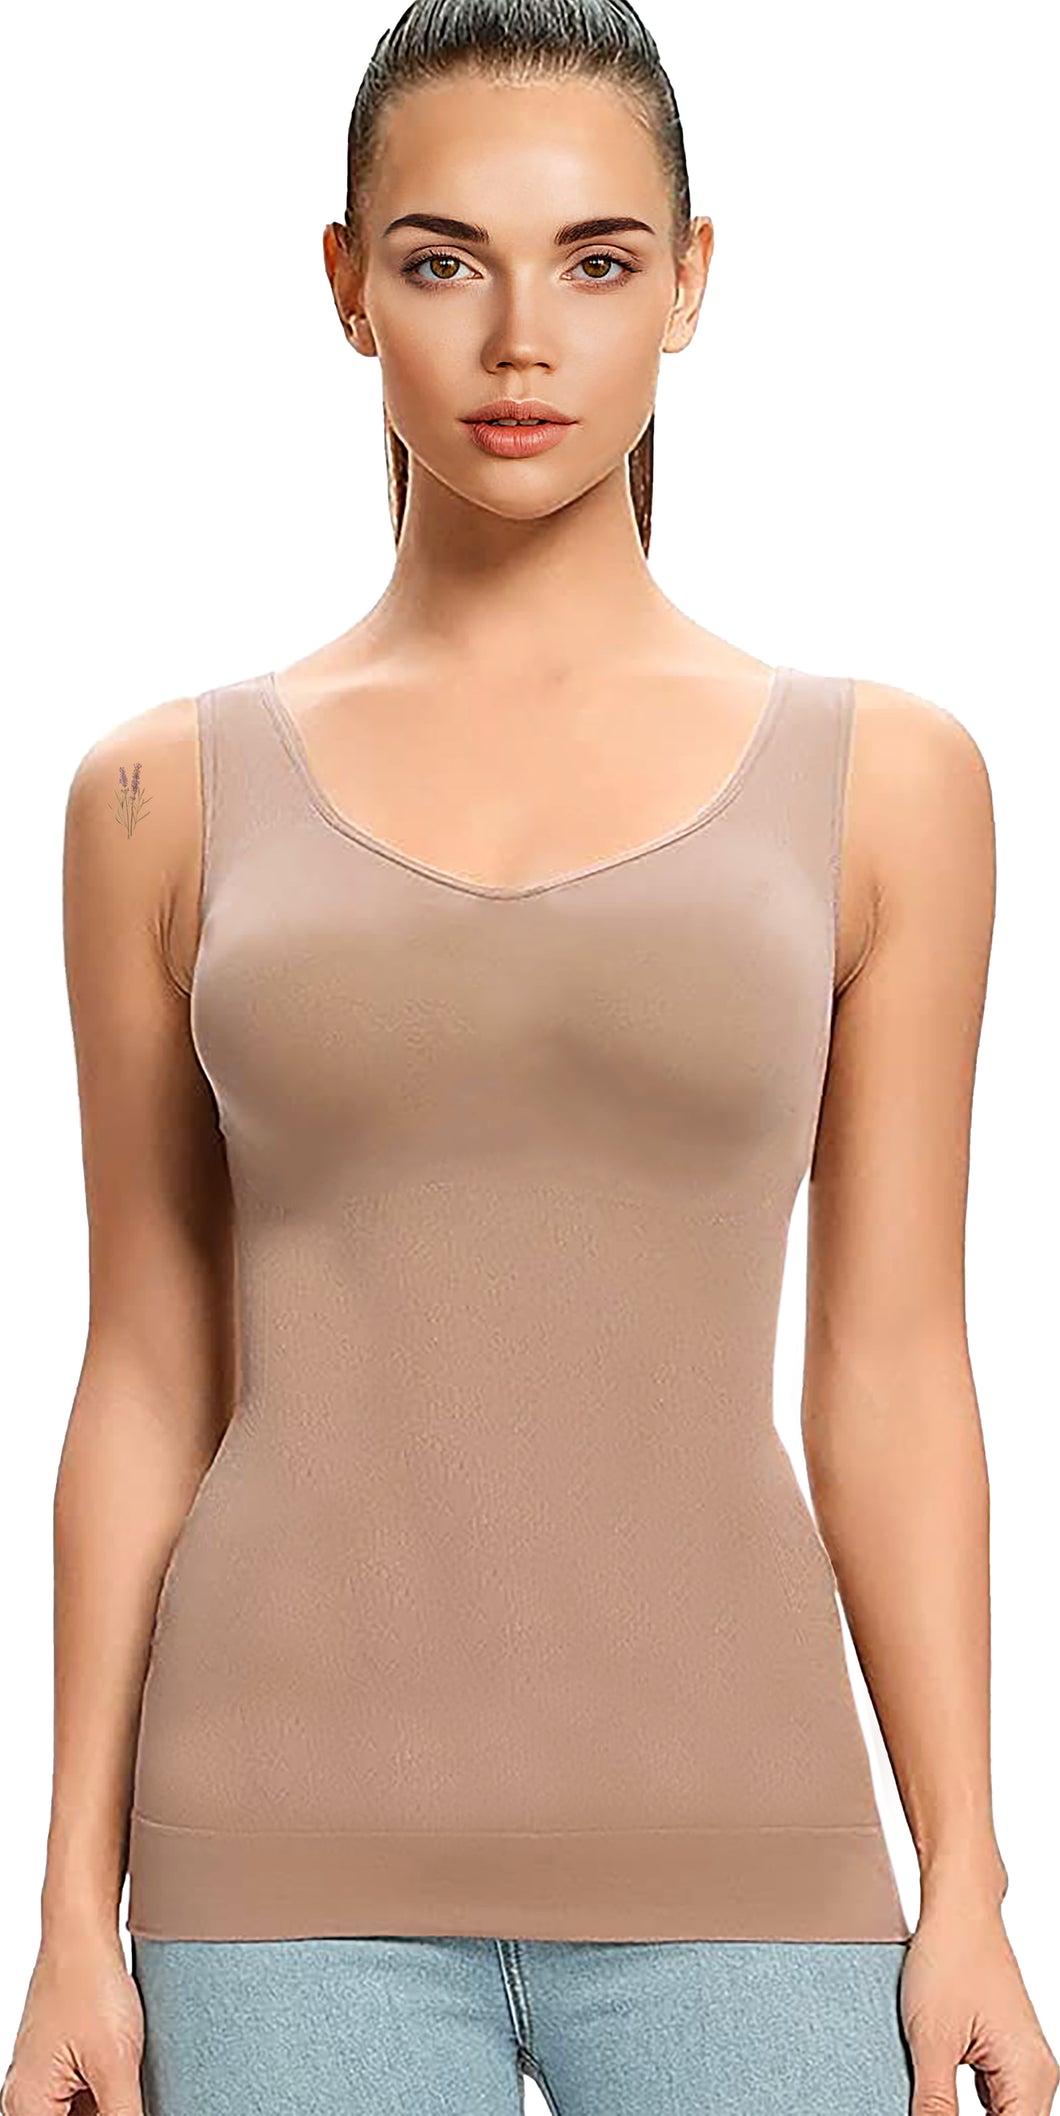 Women's Slimming Camisole Shaping Tank Top Tummy Control Cami Vest Body Shaper Compression Seamless Shapewear